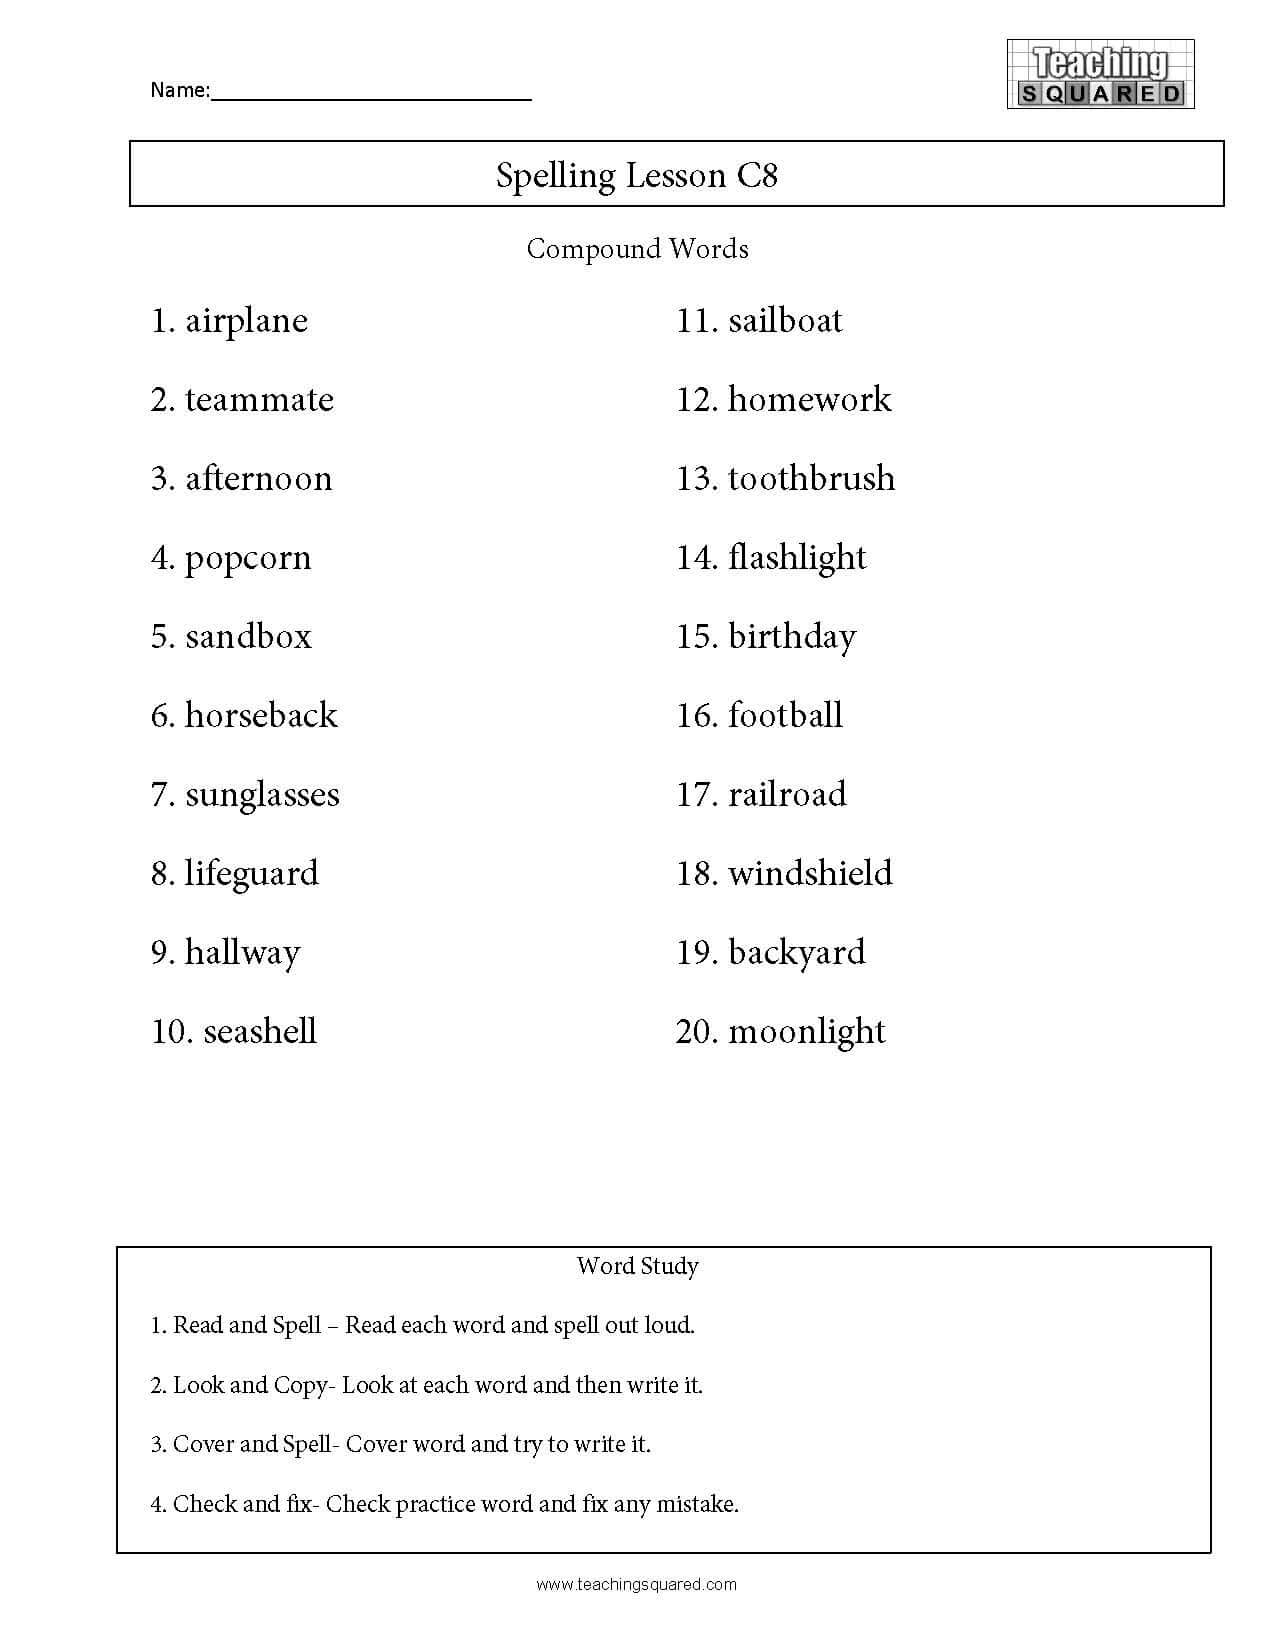 3Rd Grade Spelling Lists - Teaching Squared